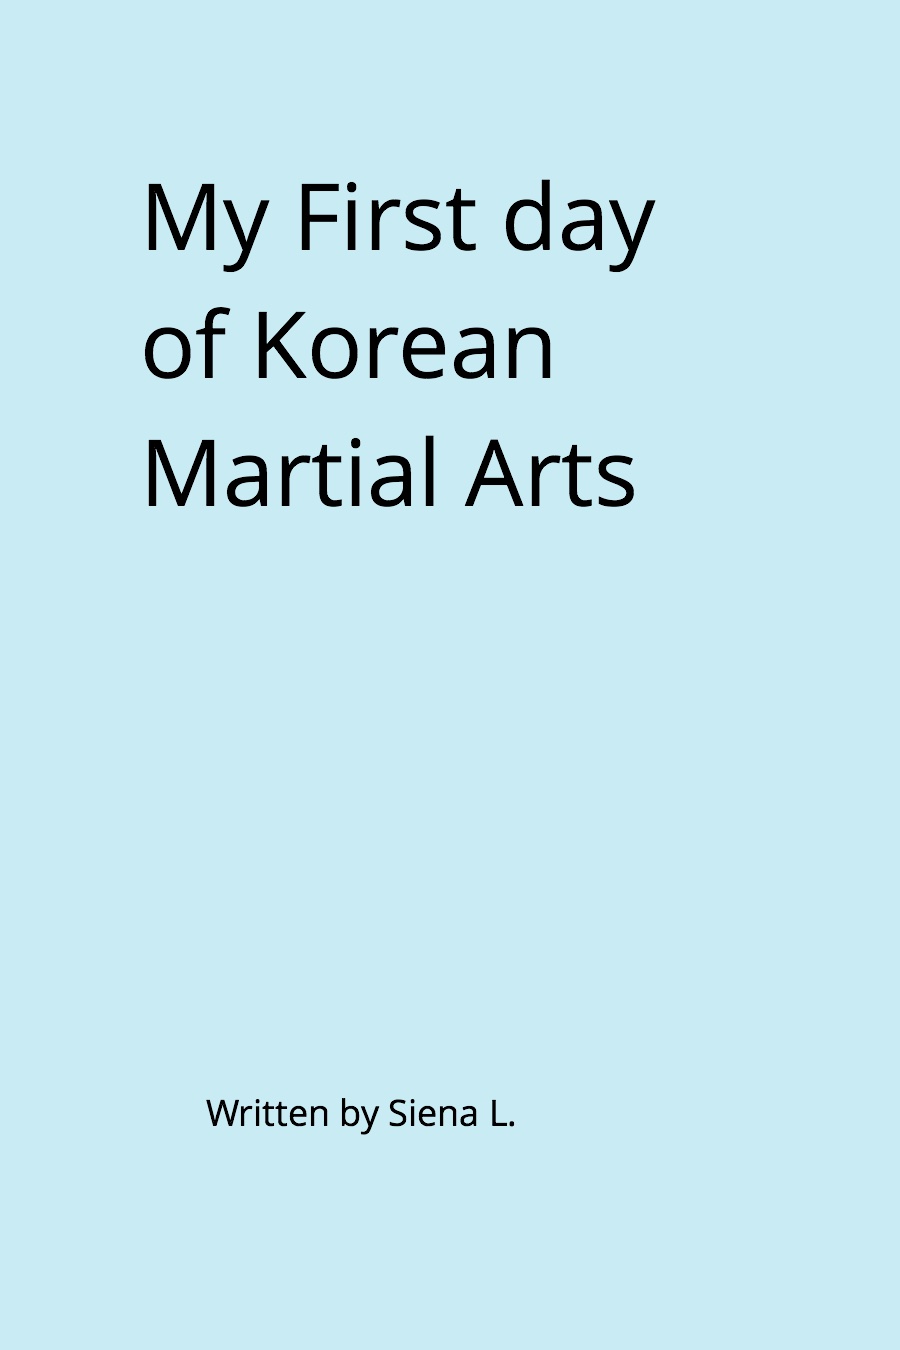 My First Day of Korean Martial Arts by Siena L